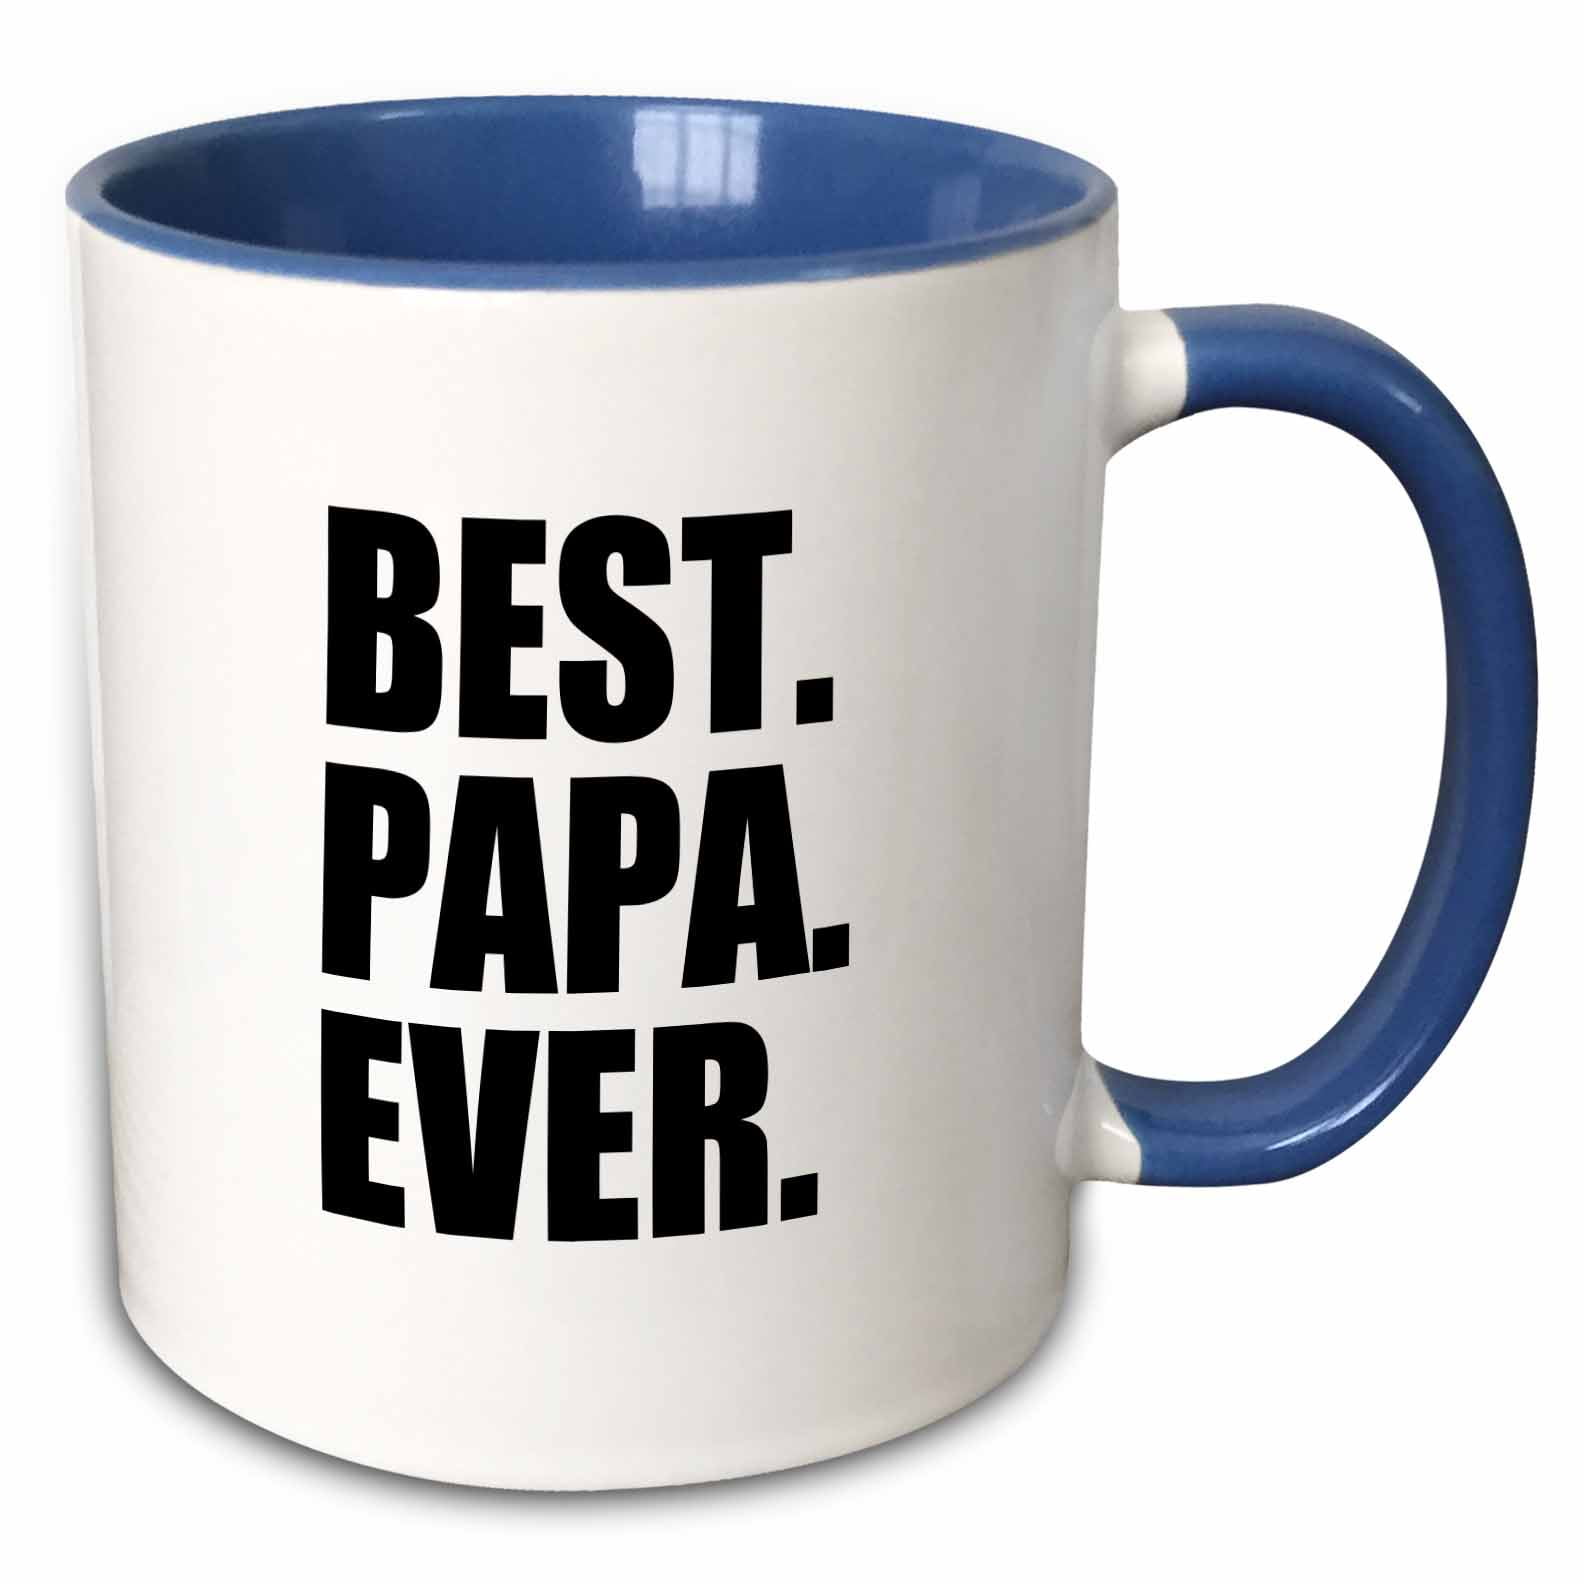 3dRose Best Papa Ever - Gifts for dads, Father nicknames, Fathers Day - black text - Two Tone Blue Mug, 11-ounce